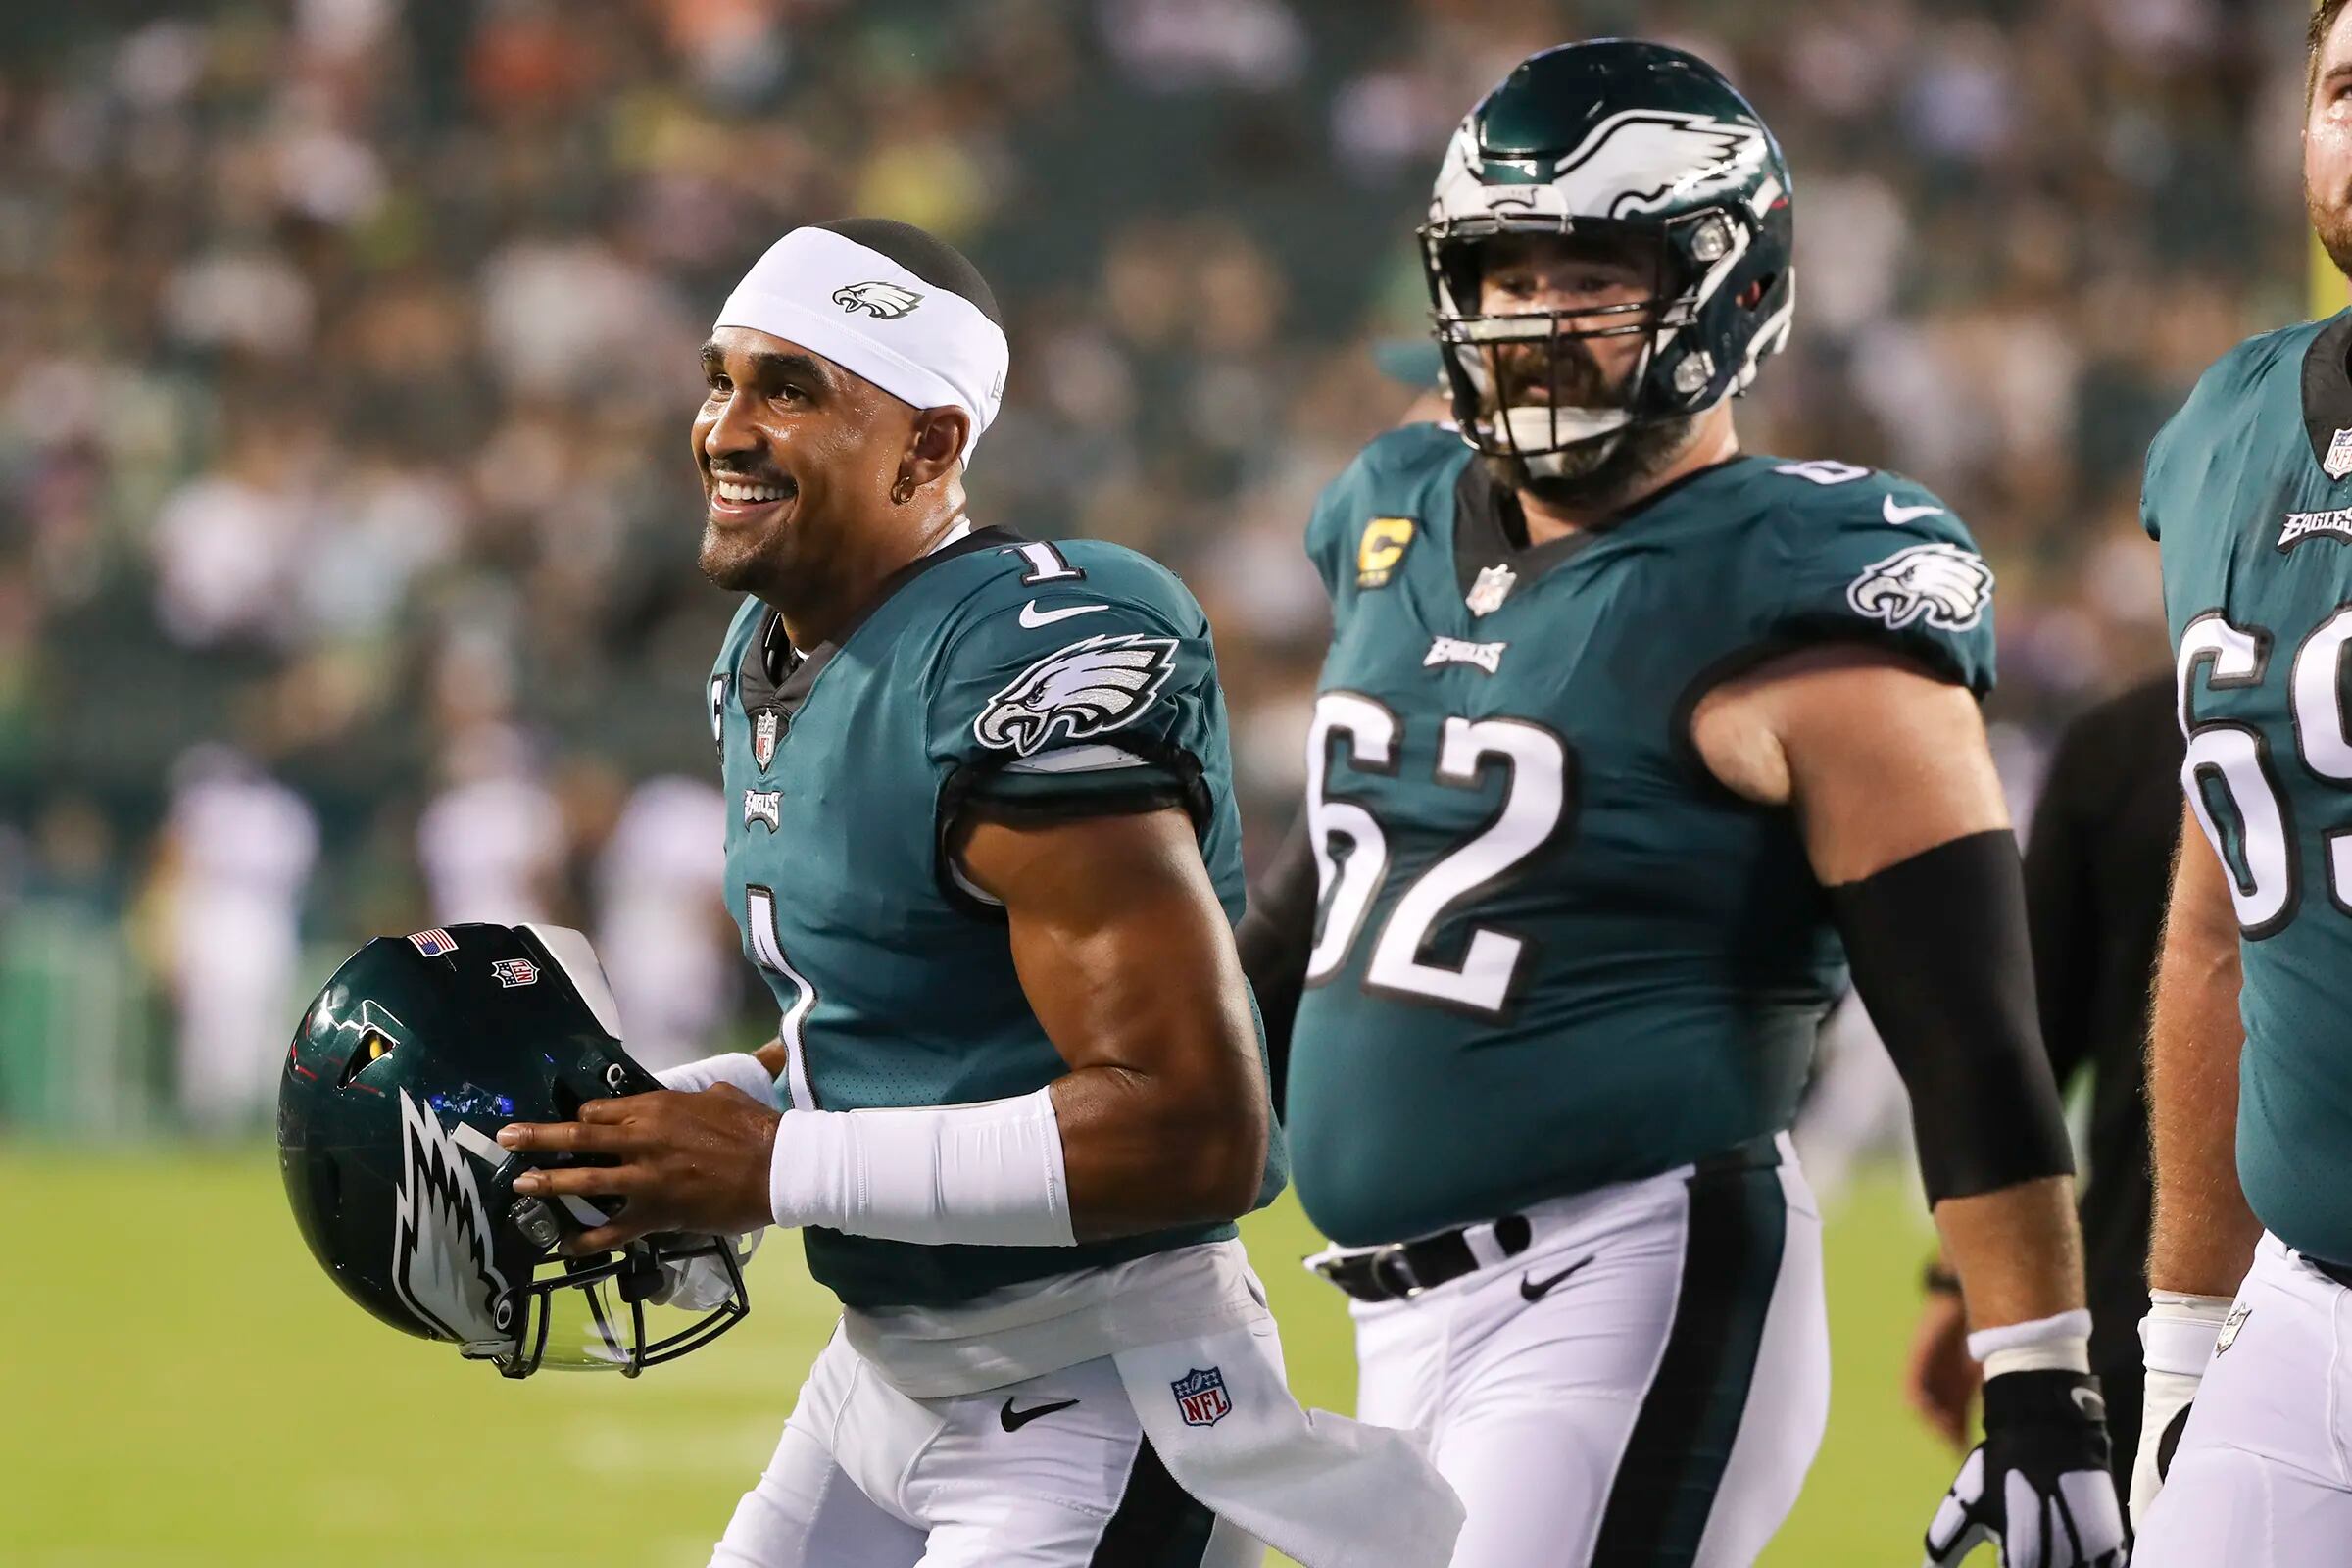 Eagles players are enraged after Week 15 matchup got rescheduled